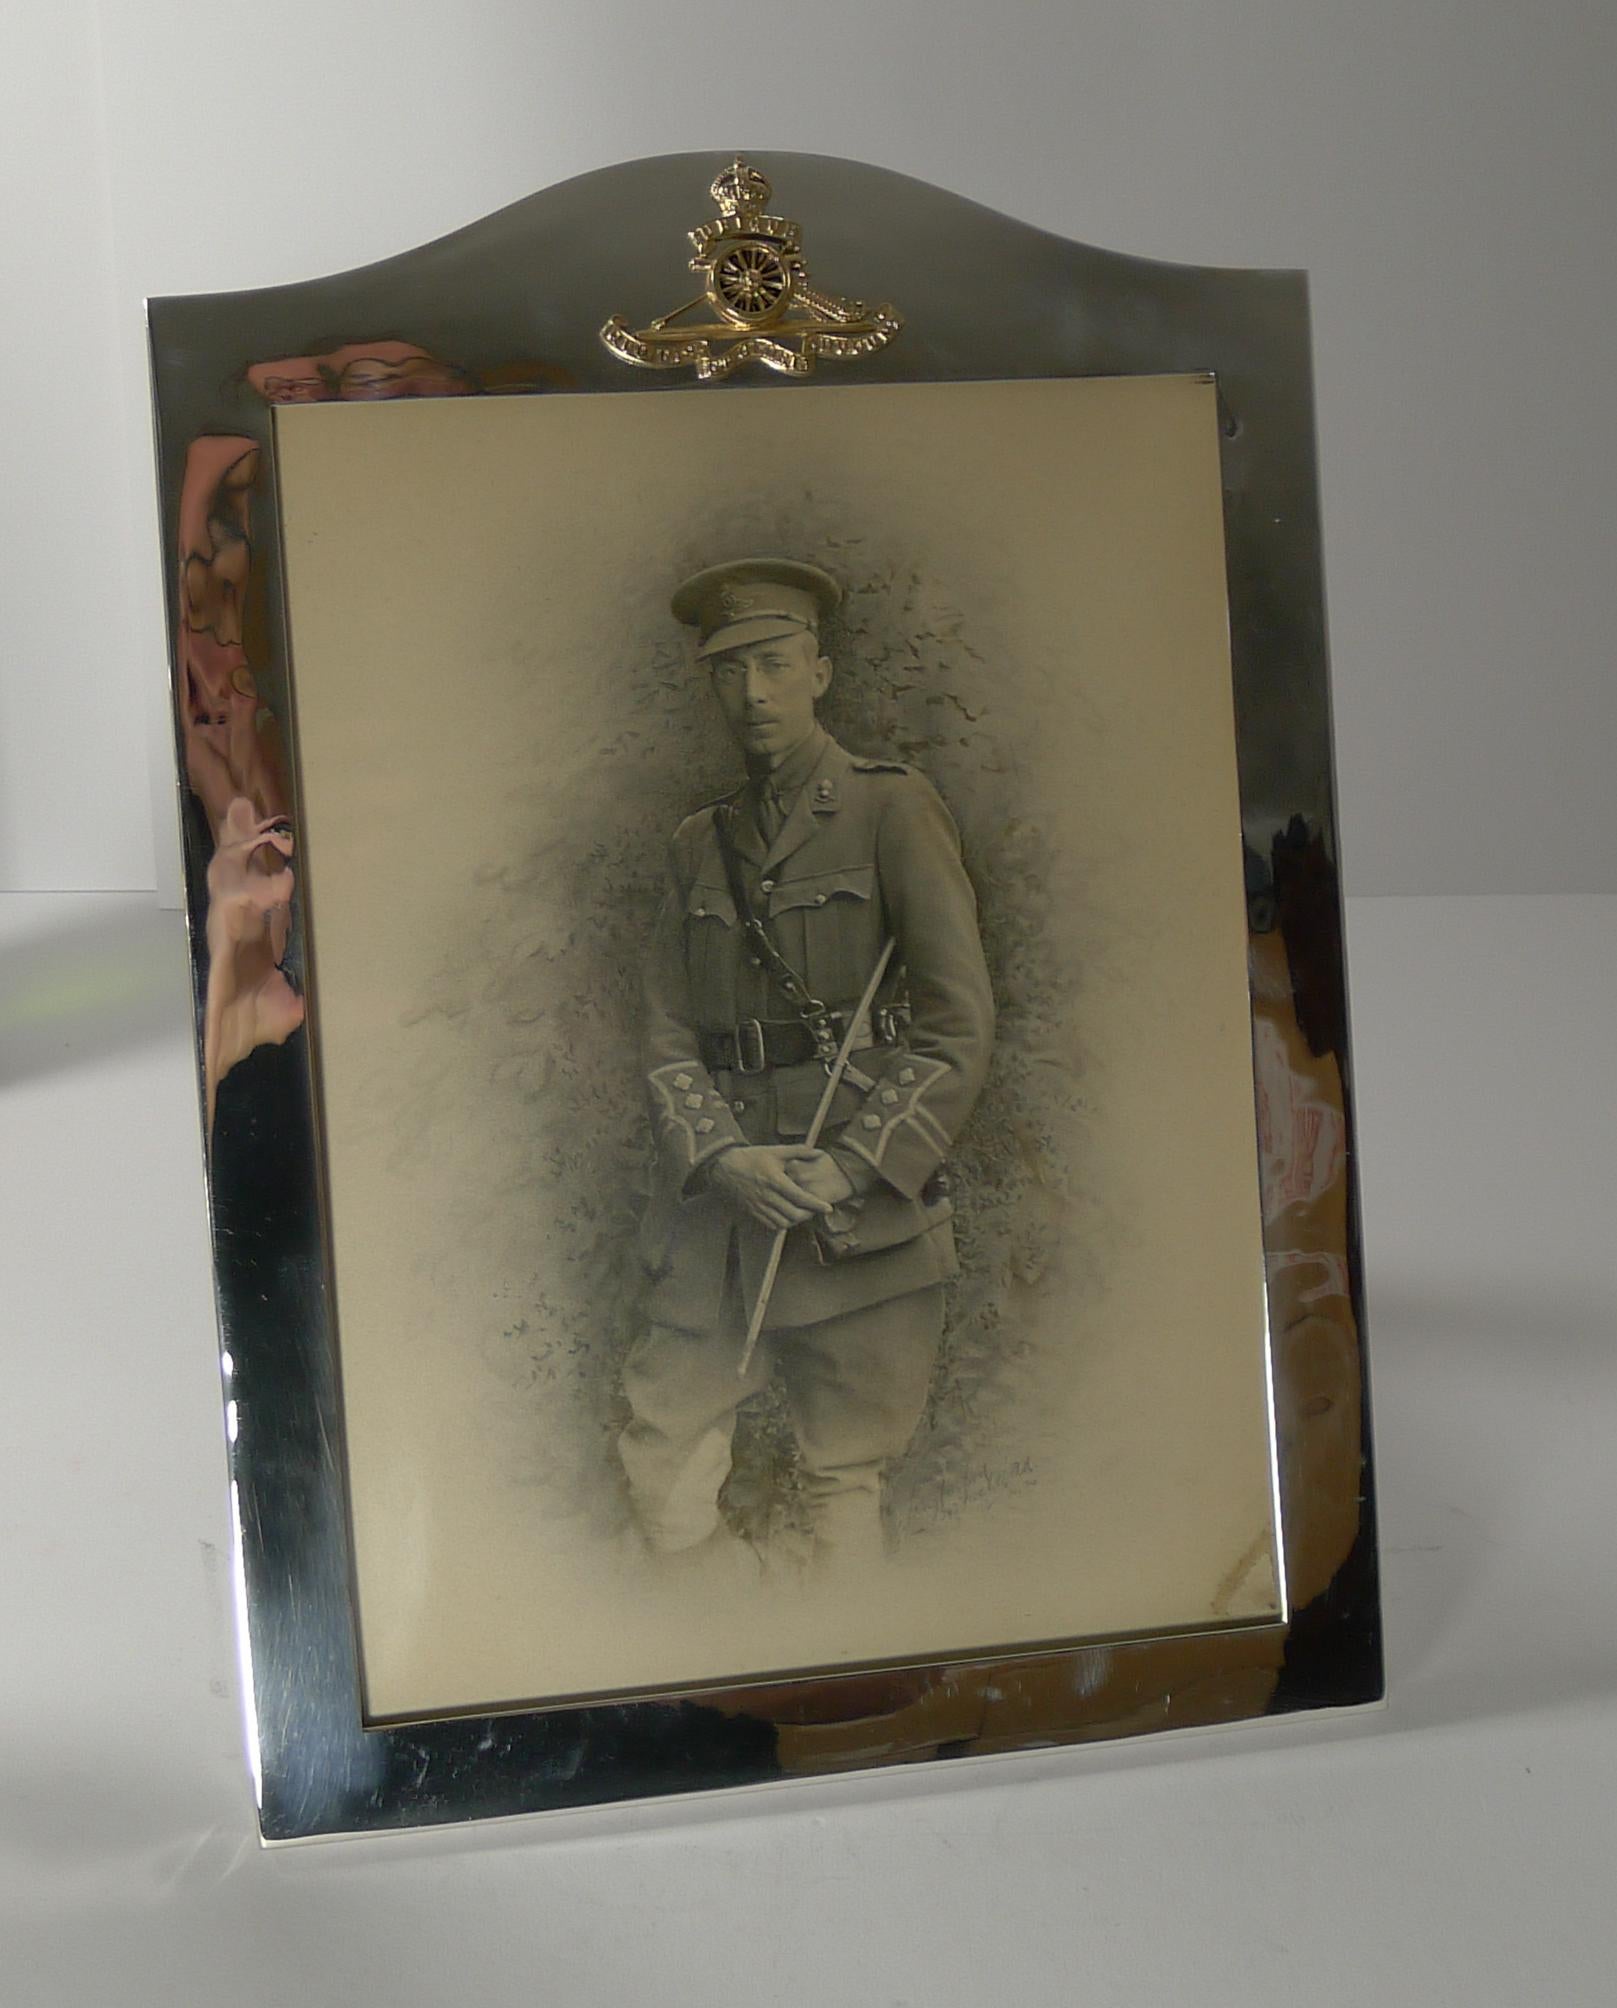 A large and grand silver plated photograph frame with military / Royal Artillary interest dating to c.1910.

The top of the frame is mounted with a gilded Royal Artillary cap badge with the motto 